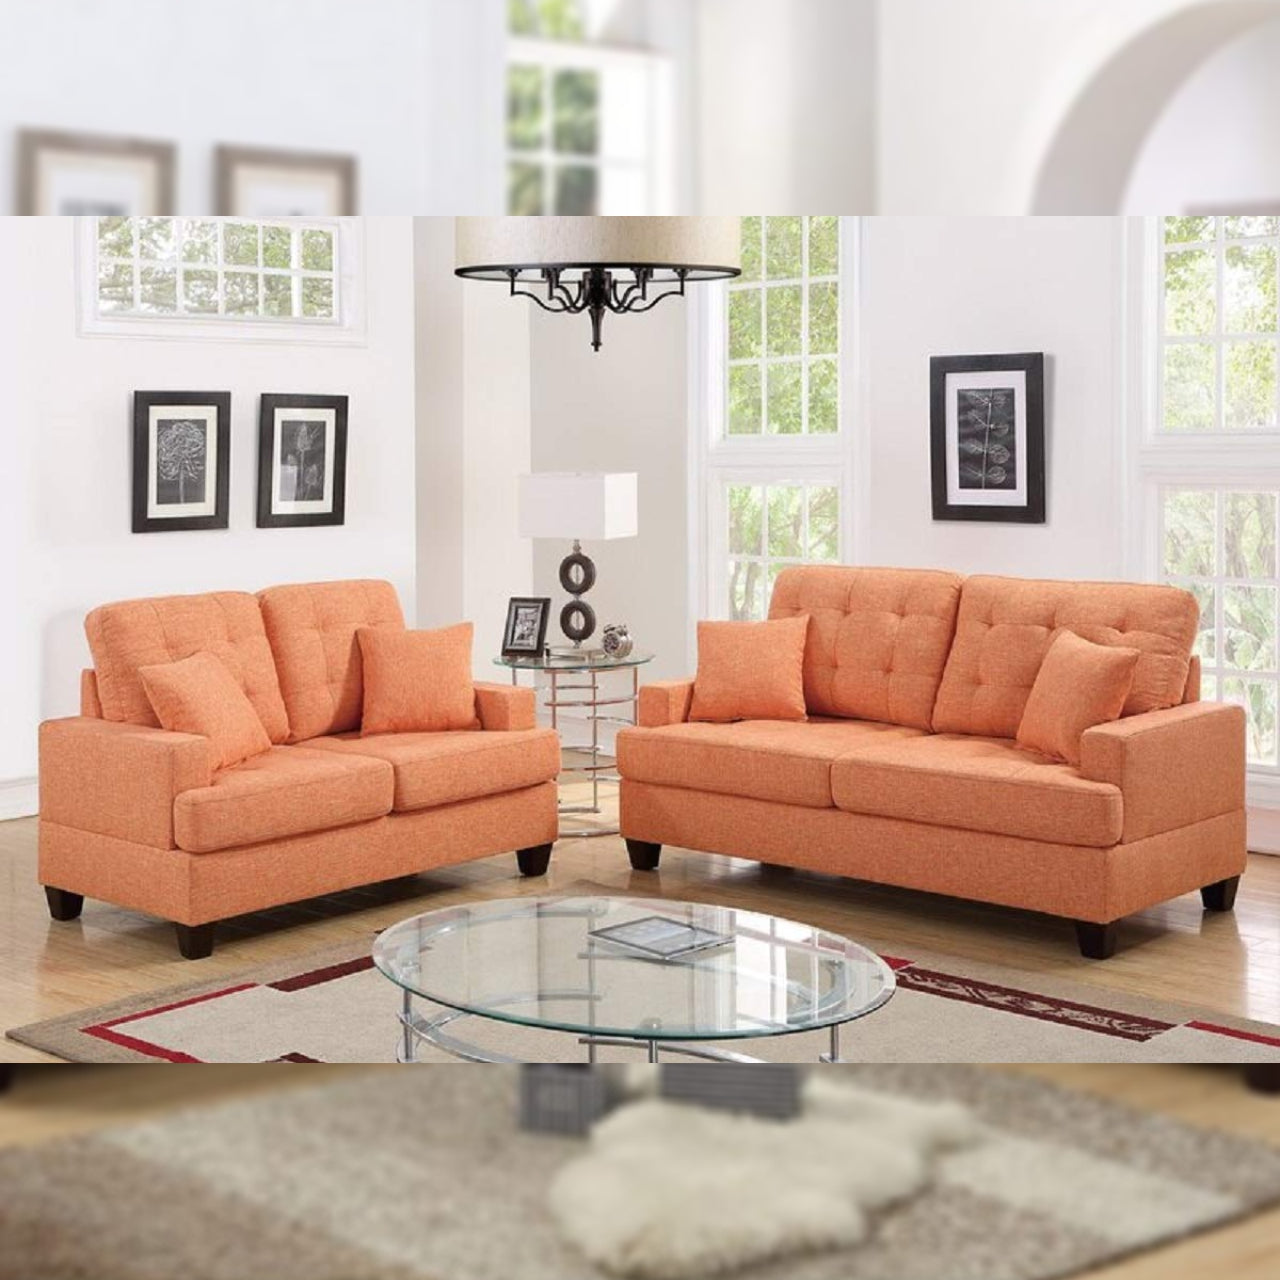 Buy 5 Seater Sofa Set Online @Best Prices in India! – GKW Retail